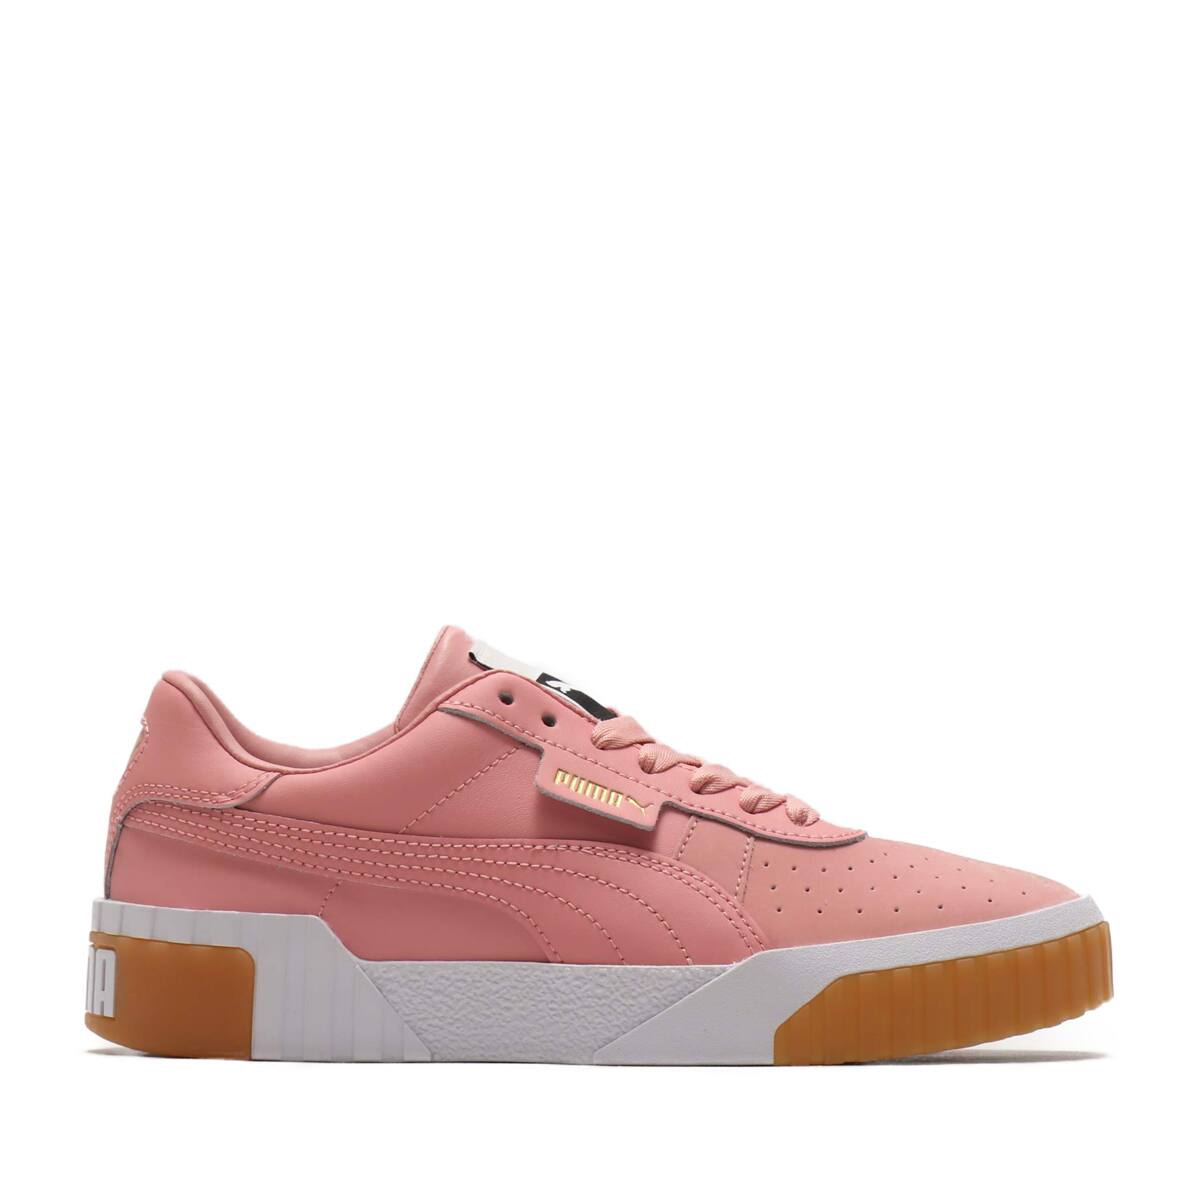 Puma Cali Exotic Womens Trainers Rose Leather Casual Lace 